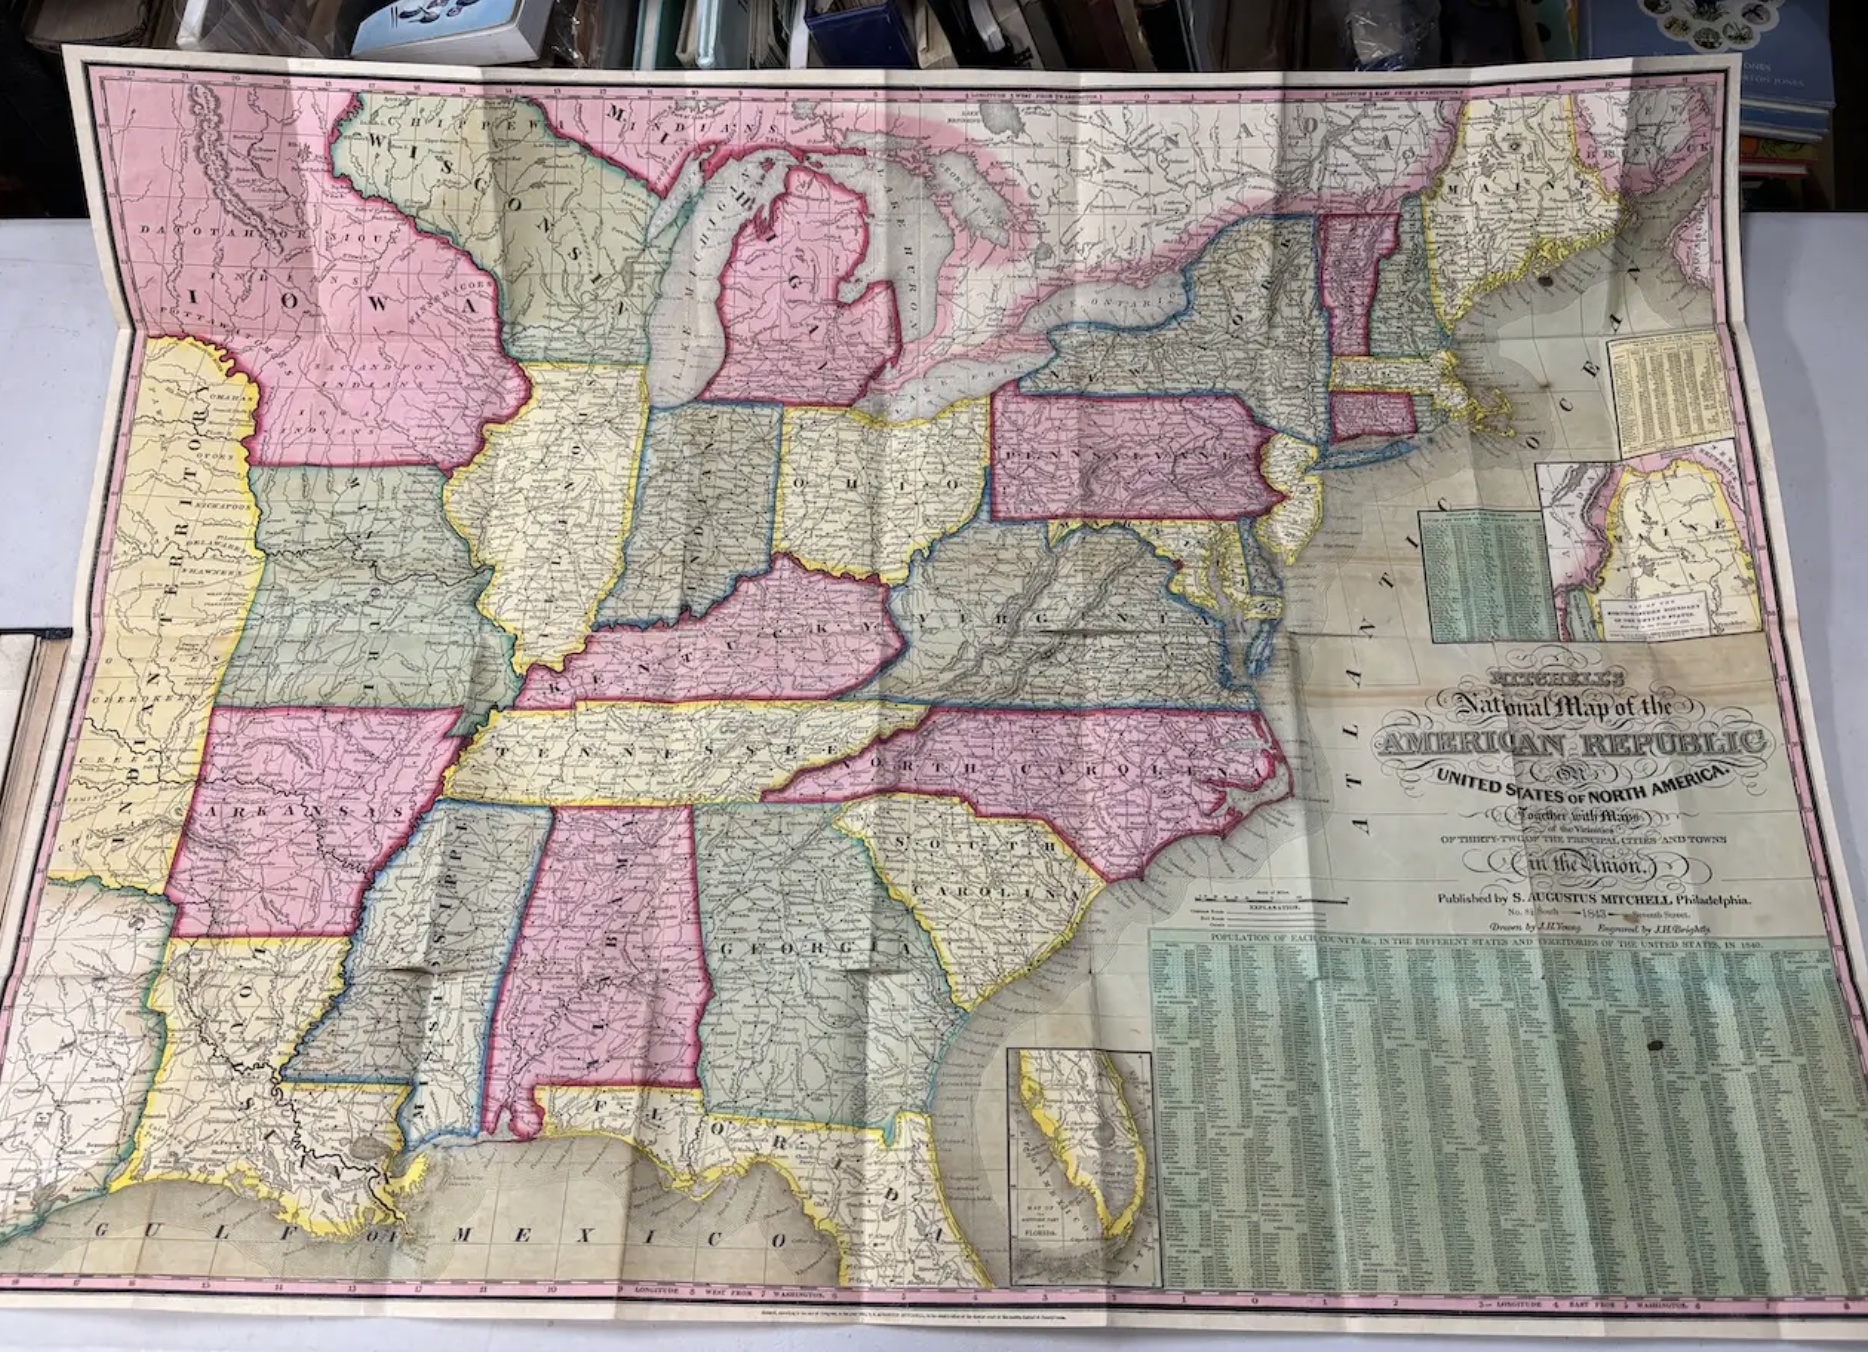 Mitchell's National Map of the United SAtates (1843)